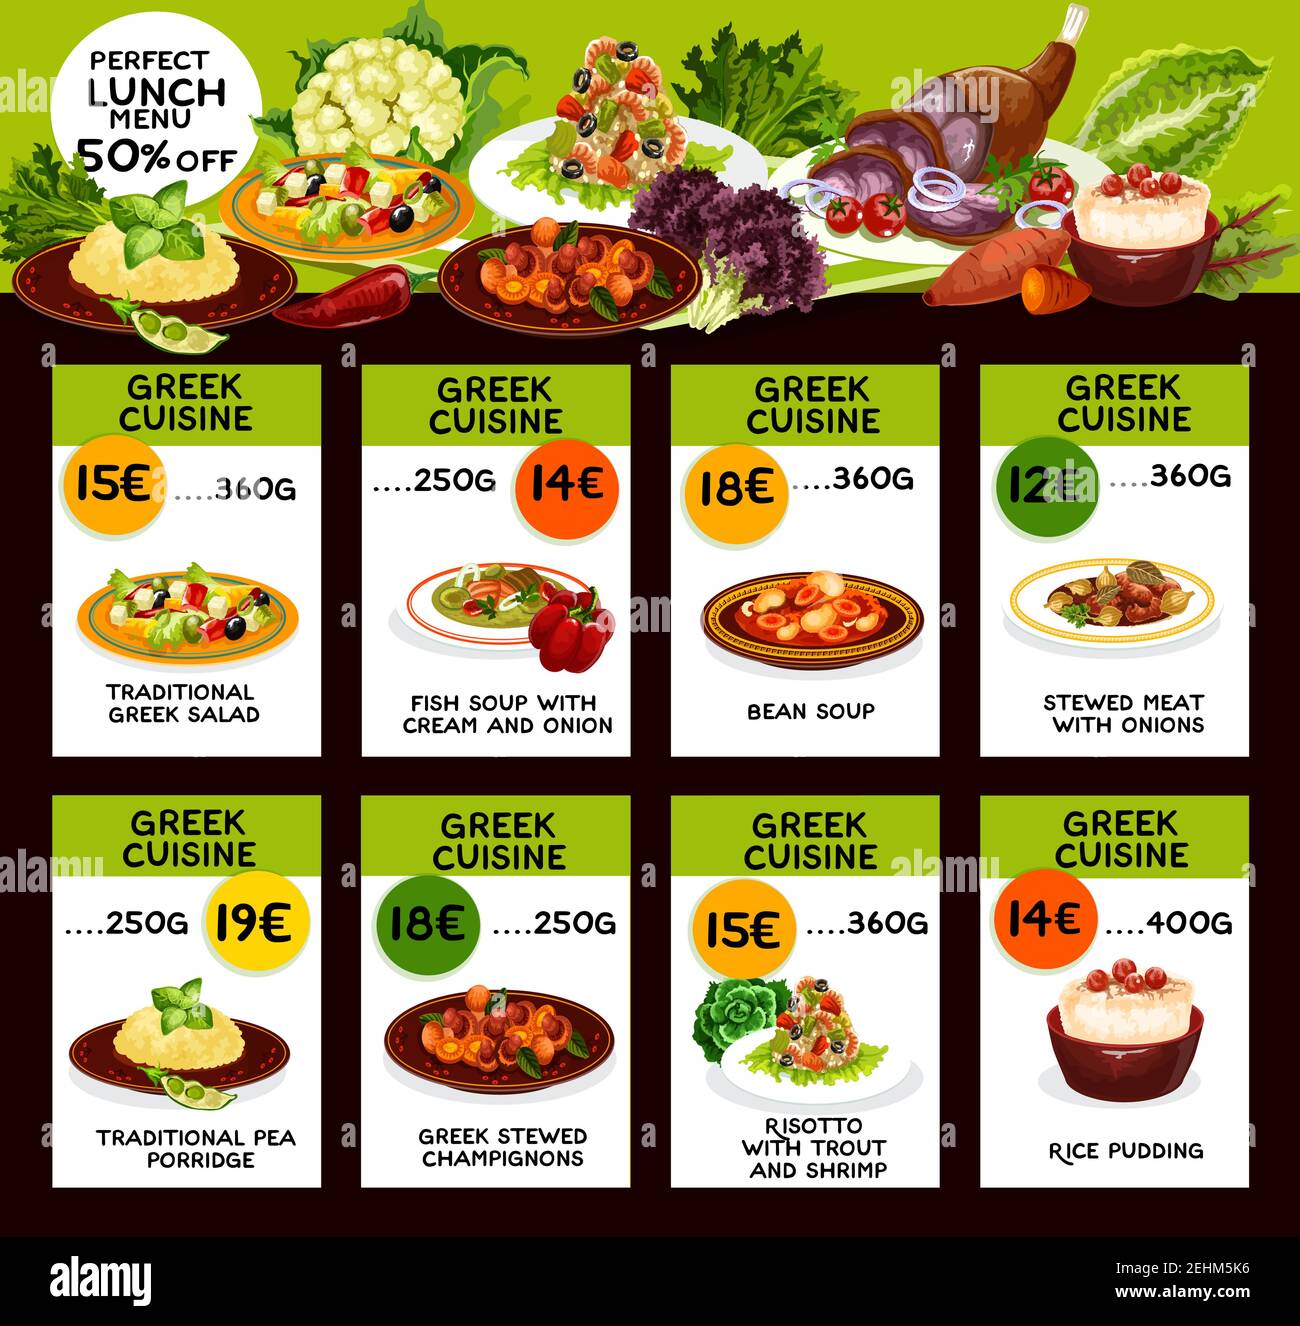 Cuisine of Greece cafe or restaurant menu of national food. Greek salad and fish or bean soups with cream and onion, stewed meat and pea porridge, cha Stock Vector